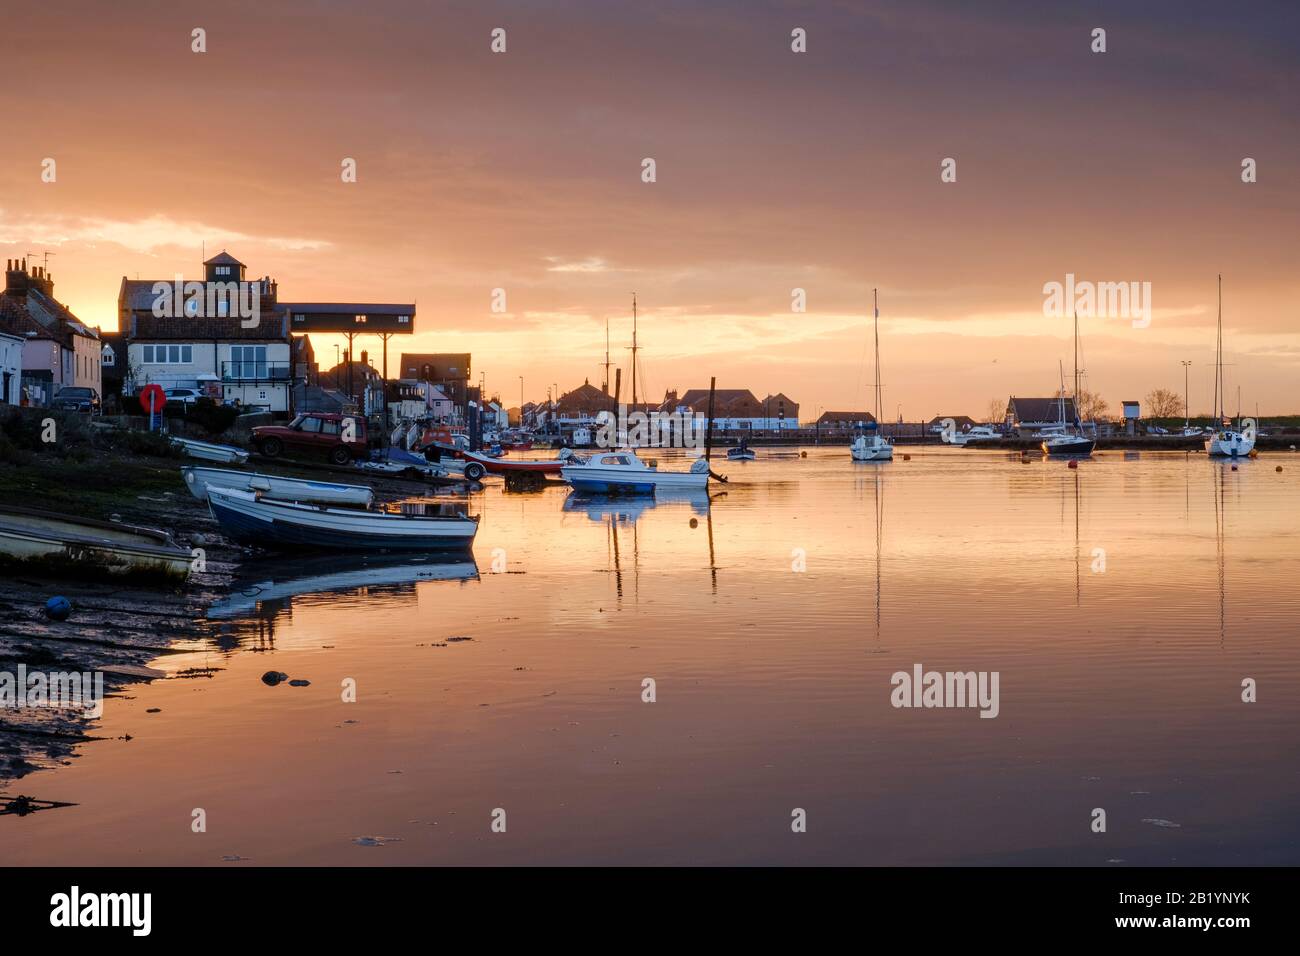 Tranquil scene of boats at anchor in the Port of Wells at sunset. Stock Photo